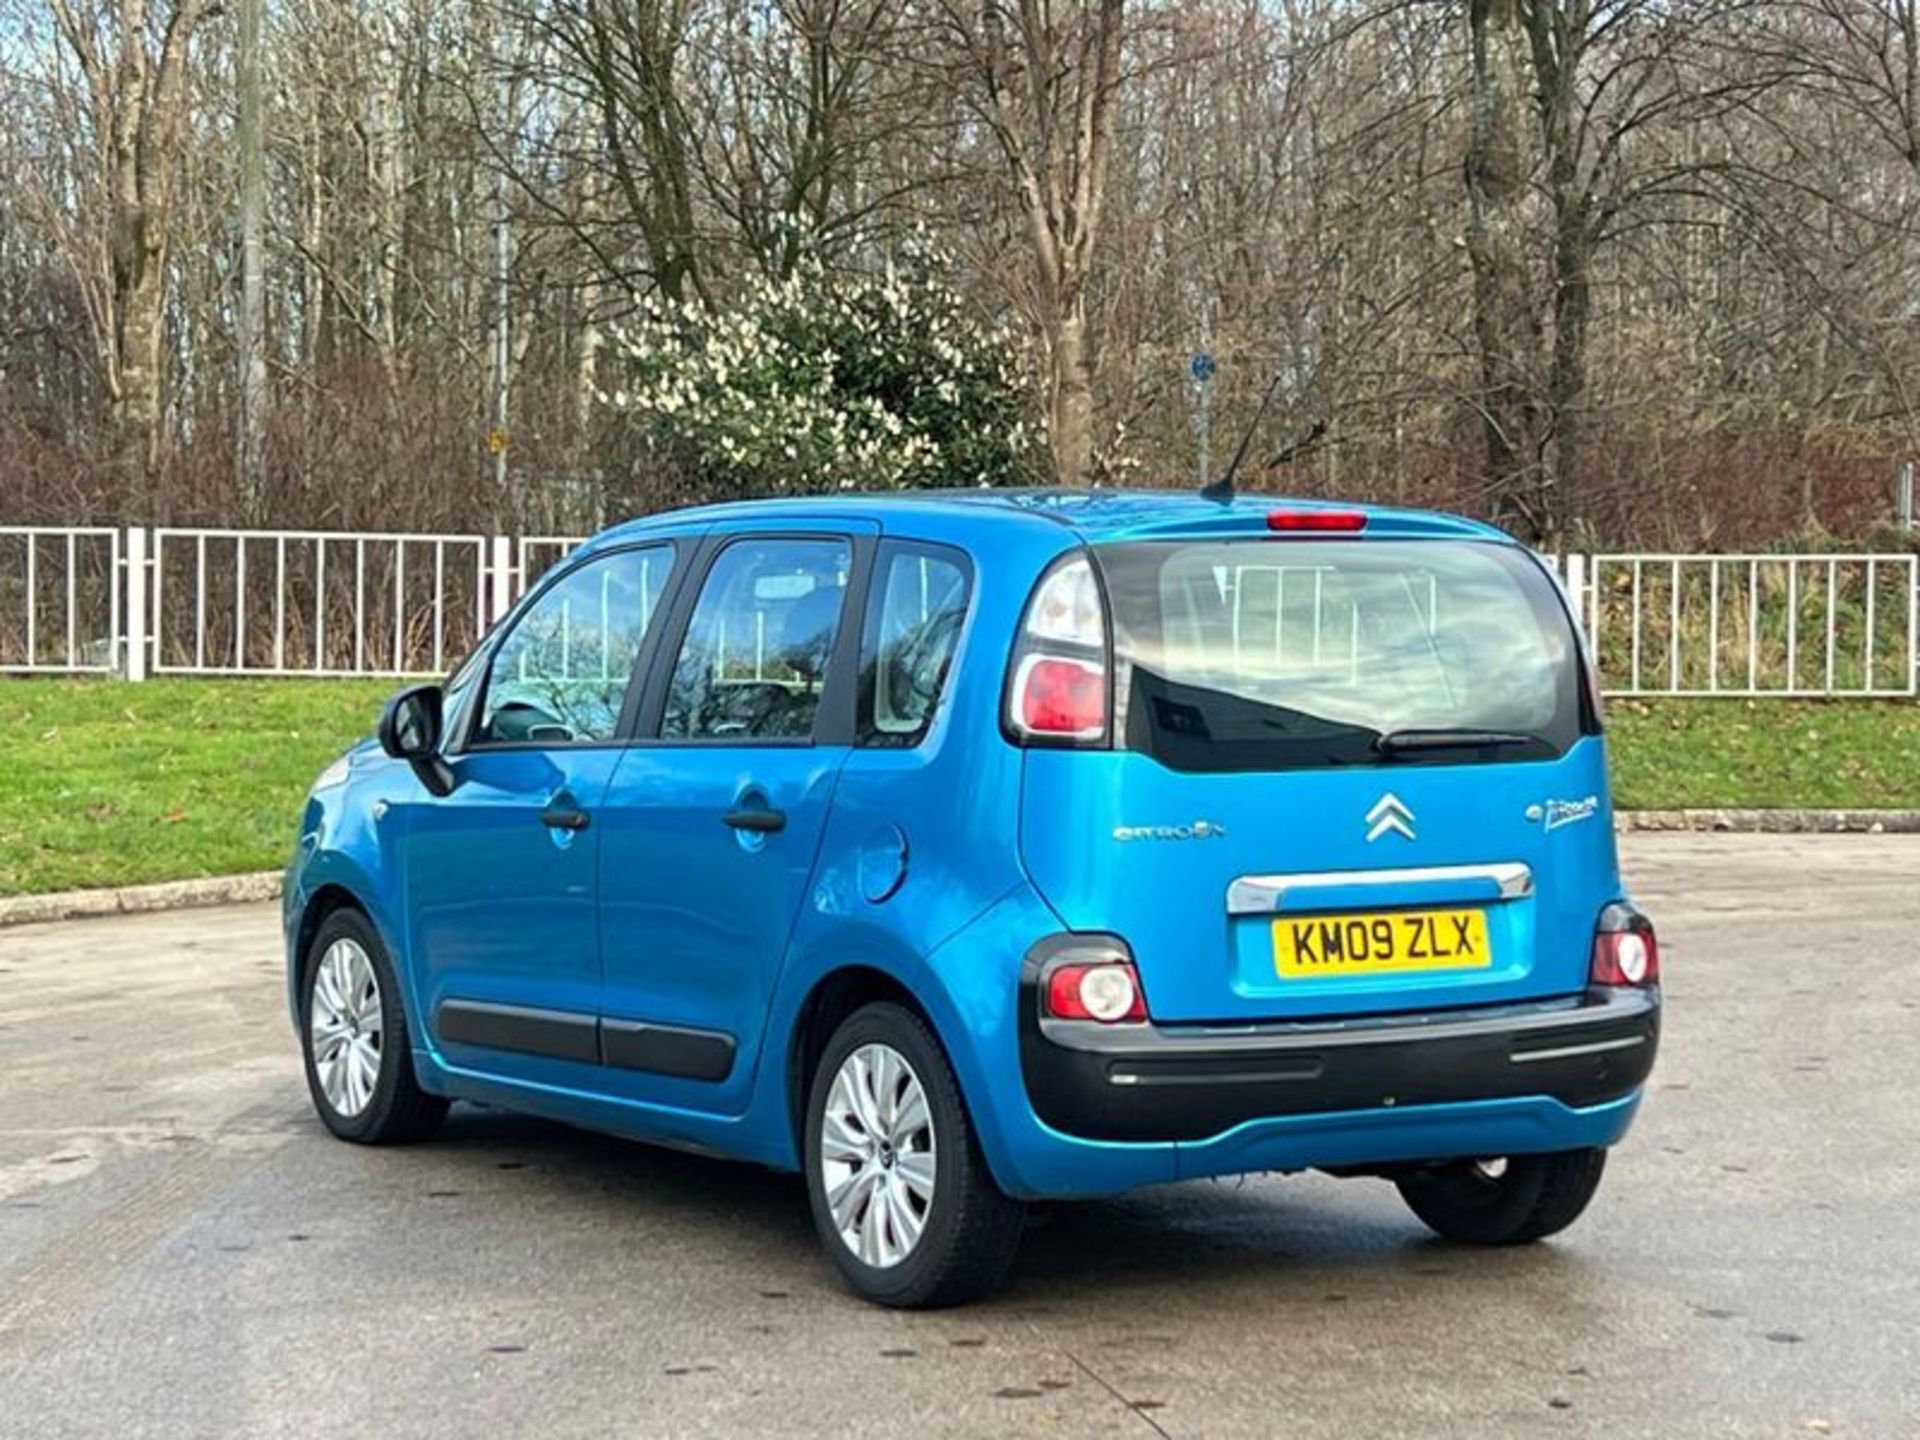 CITROEN C3 PICASSO 1.4 VTI VTR+ EURO 4 5DR 2009 (09 REG) - SPARES AND REPAIRS - Image 8 of 53